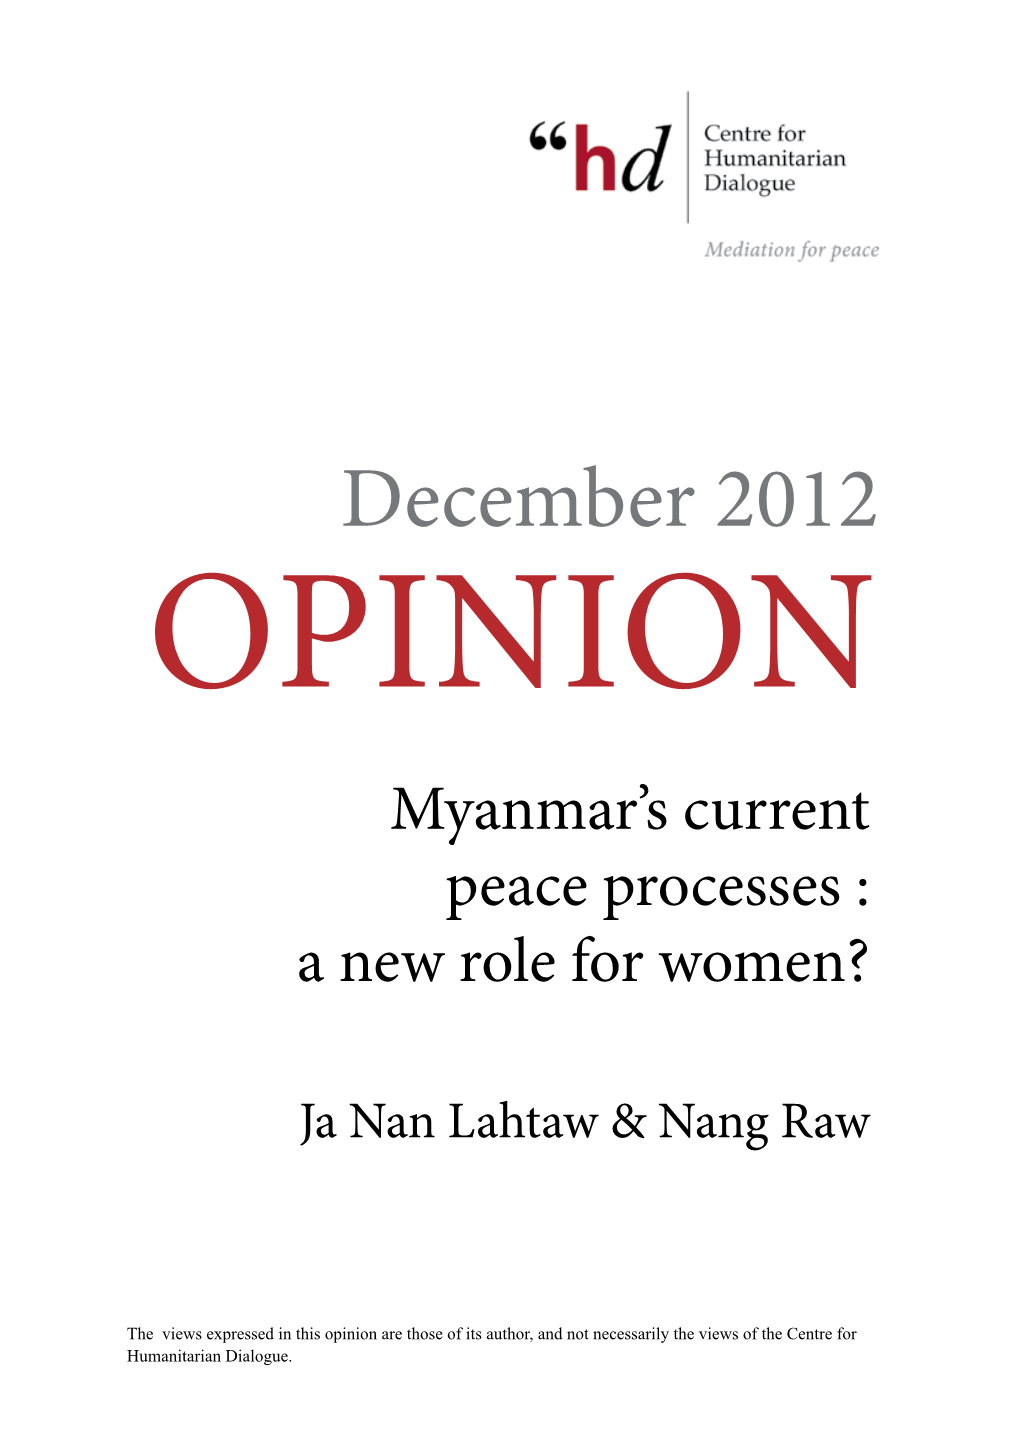 Myanmar's Current Peace Processes: a New Role for Women?